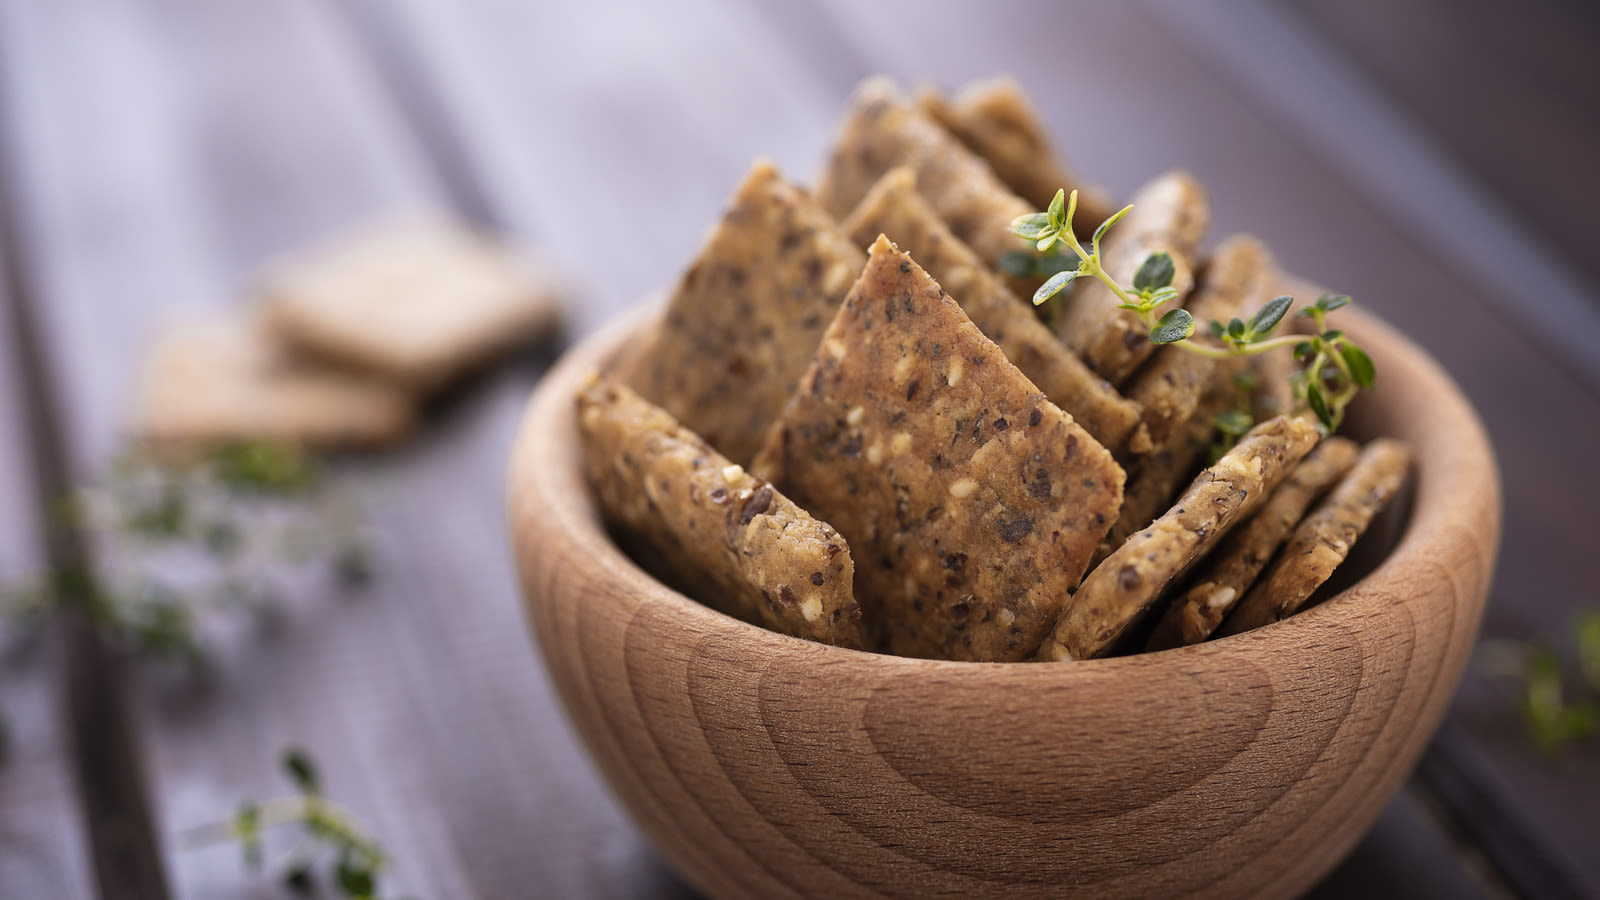 Put Your Favorite Crackers In The Smoker For A Unique, Savory Snack